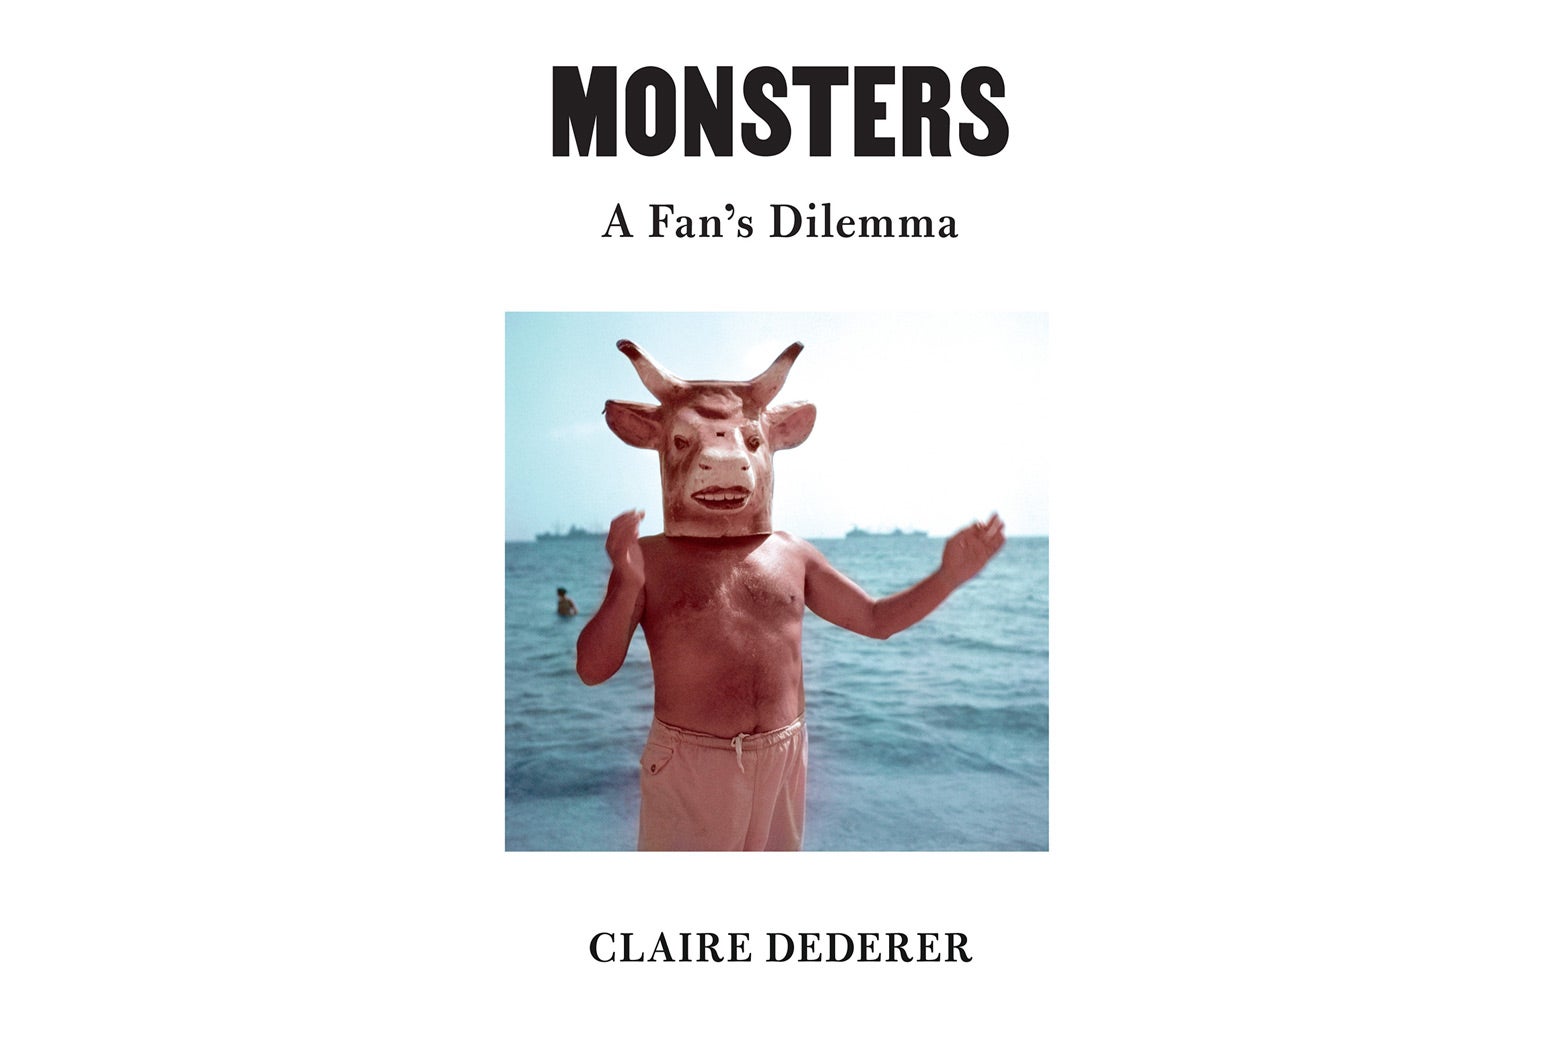 The cover of Monsters.